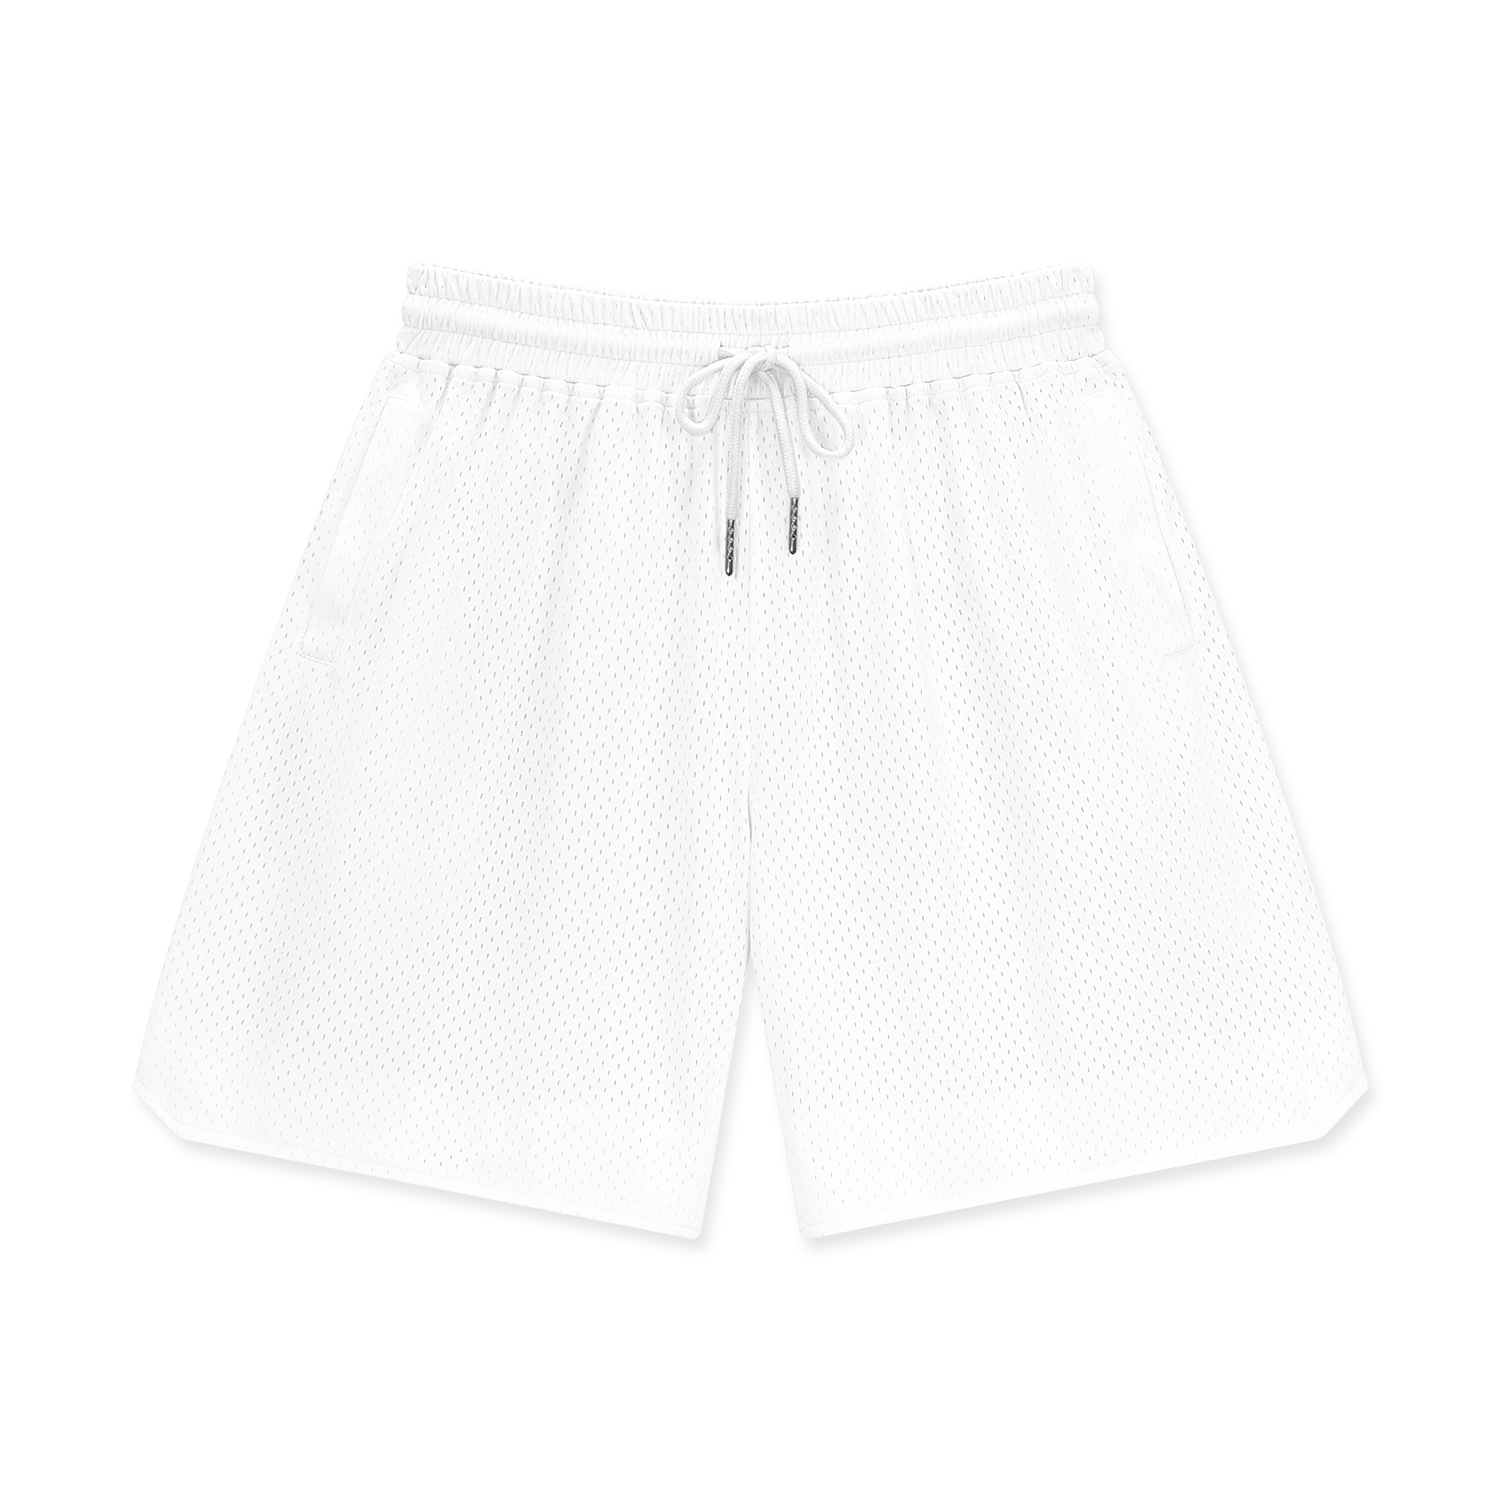 All-Over Print Men's Basketball Shorts Fast Drying | HugePOD-2